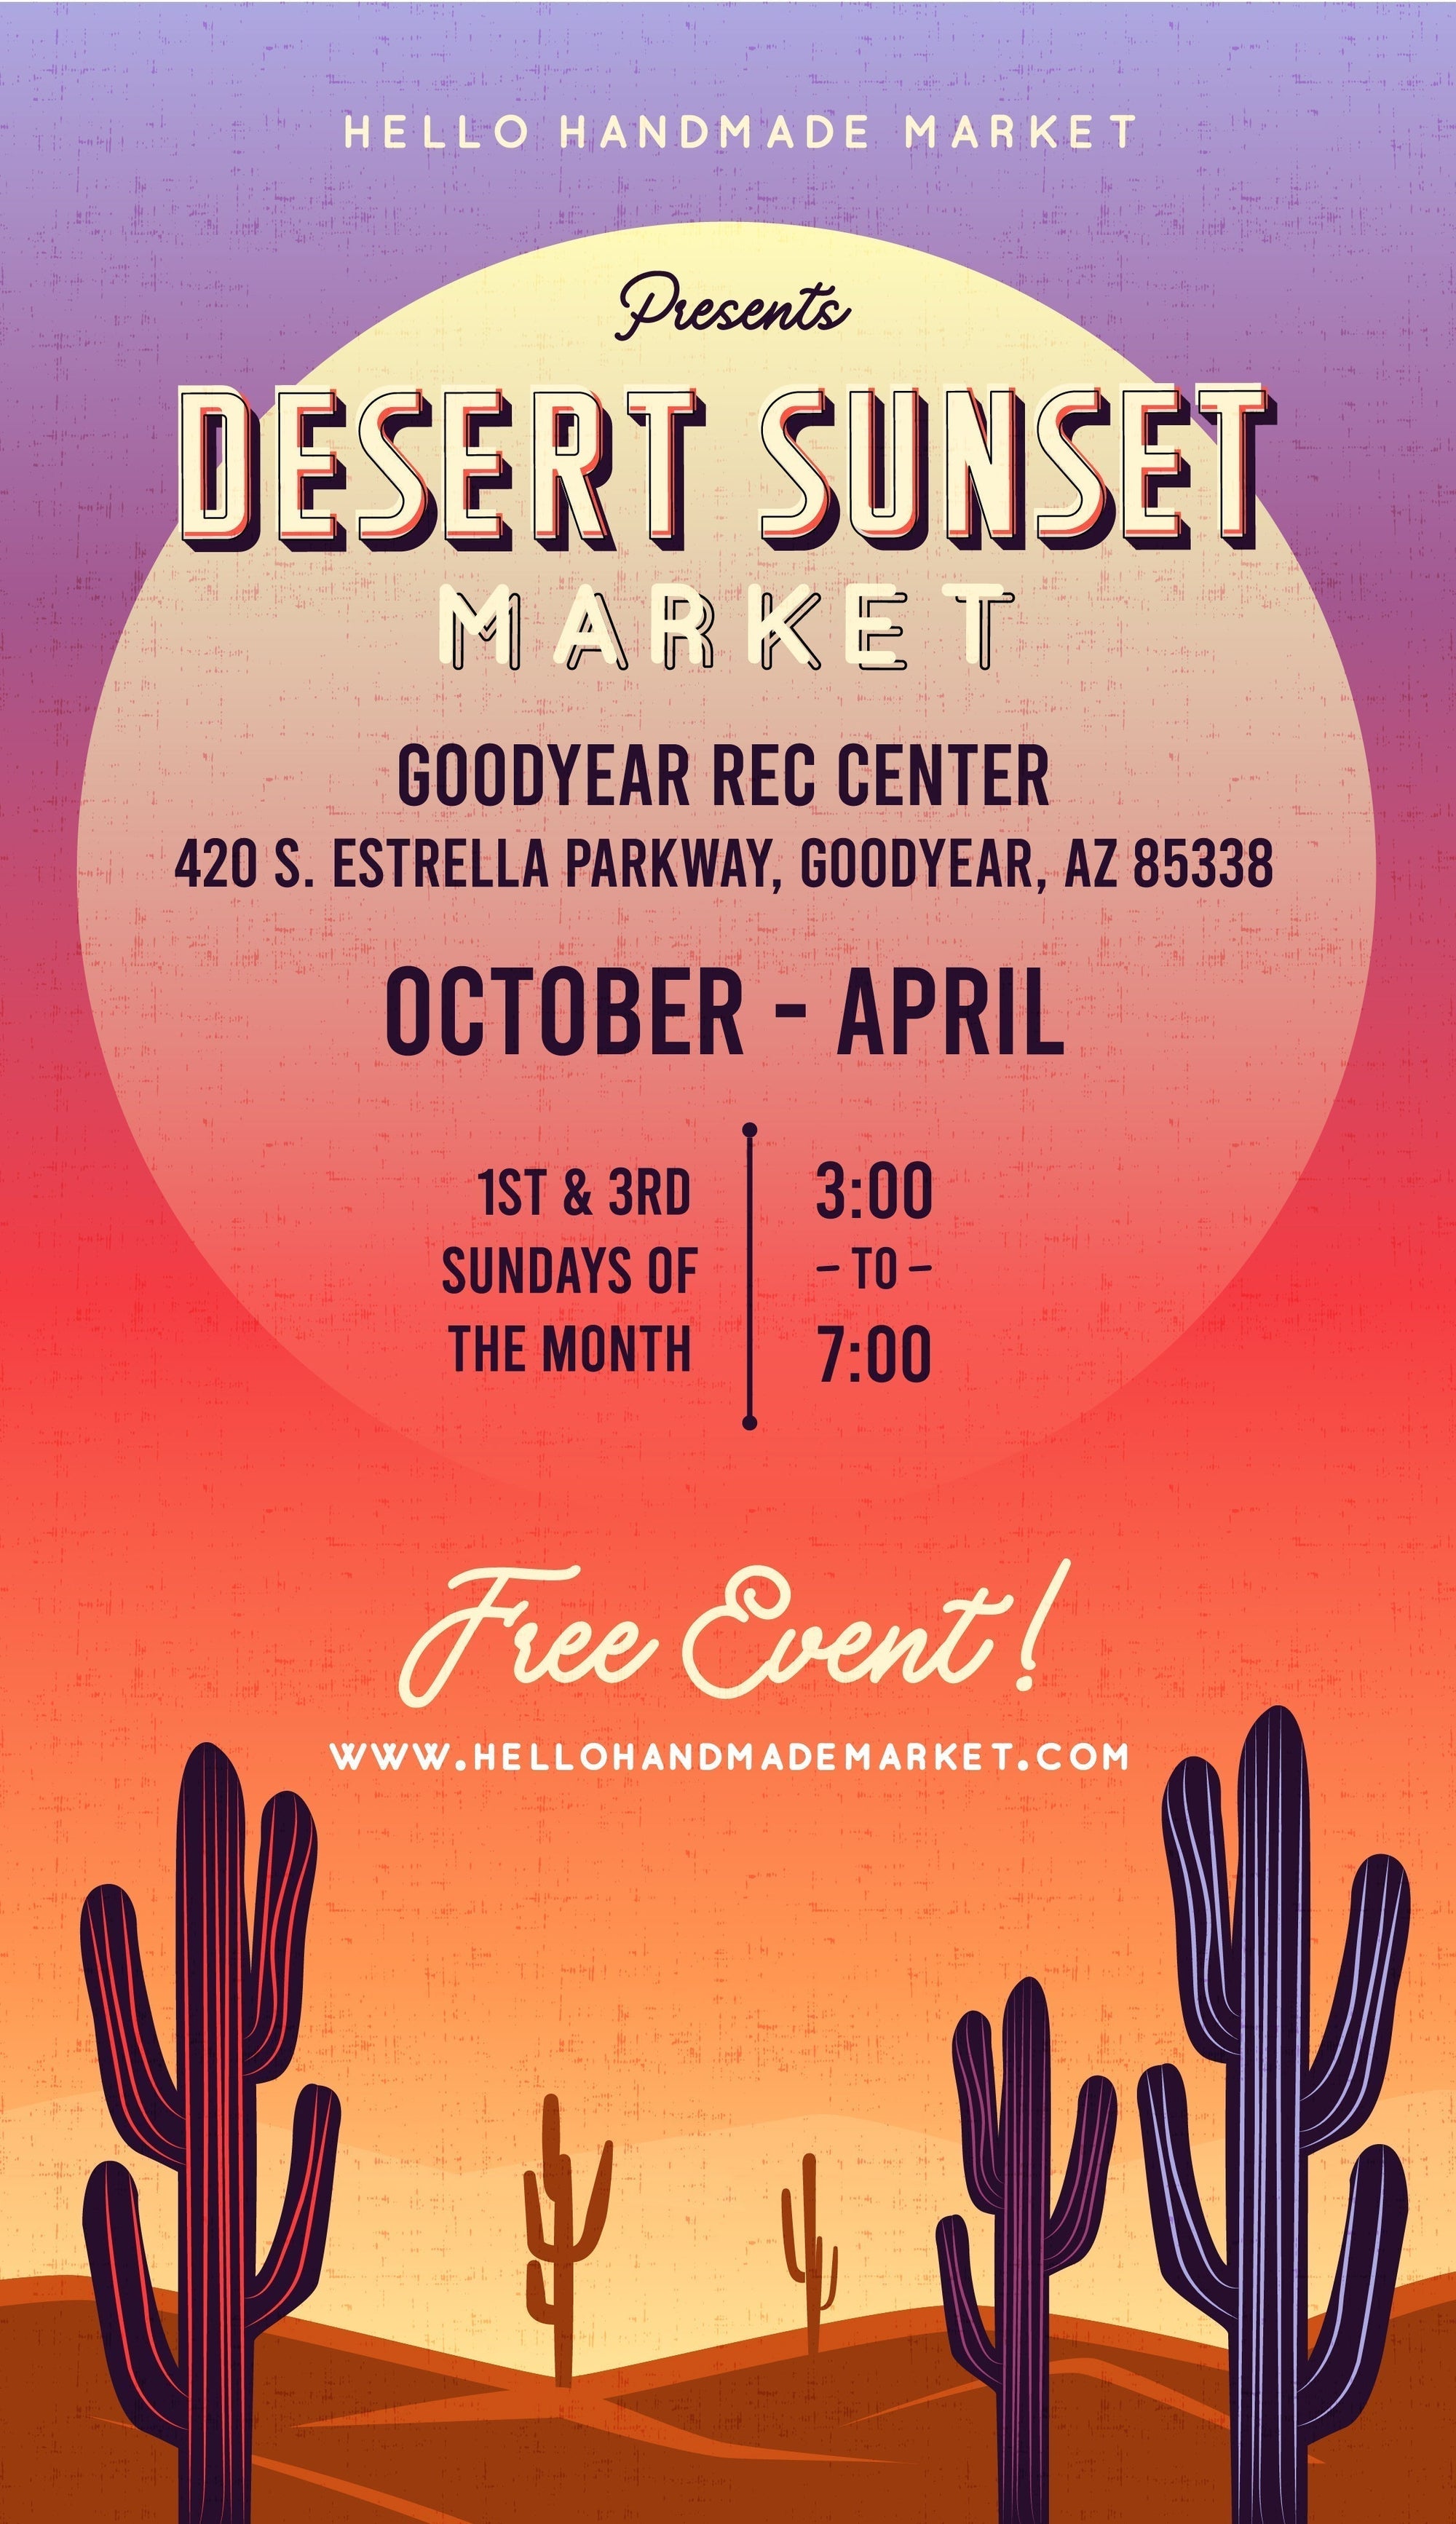 Be a Vendor on January 5, 2025 for the Desert Sunset Market at the Goodyear Recreation Center